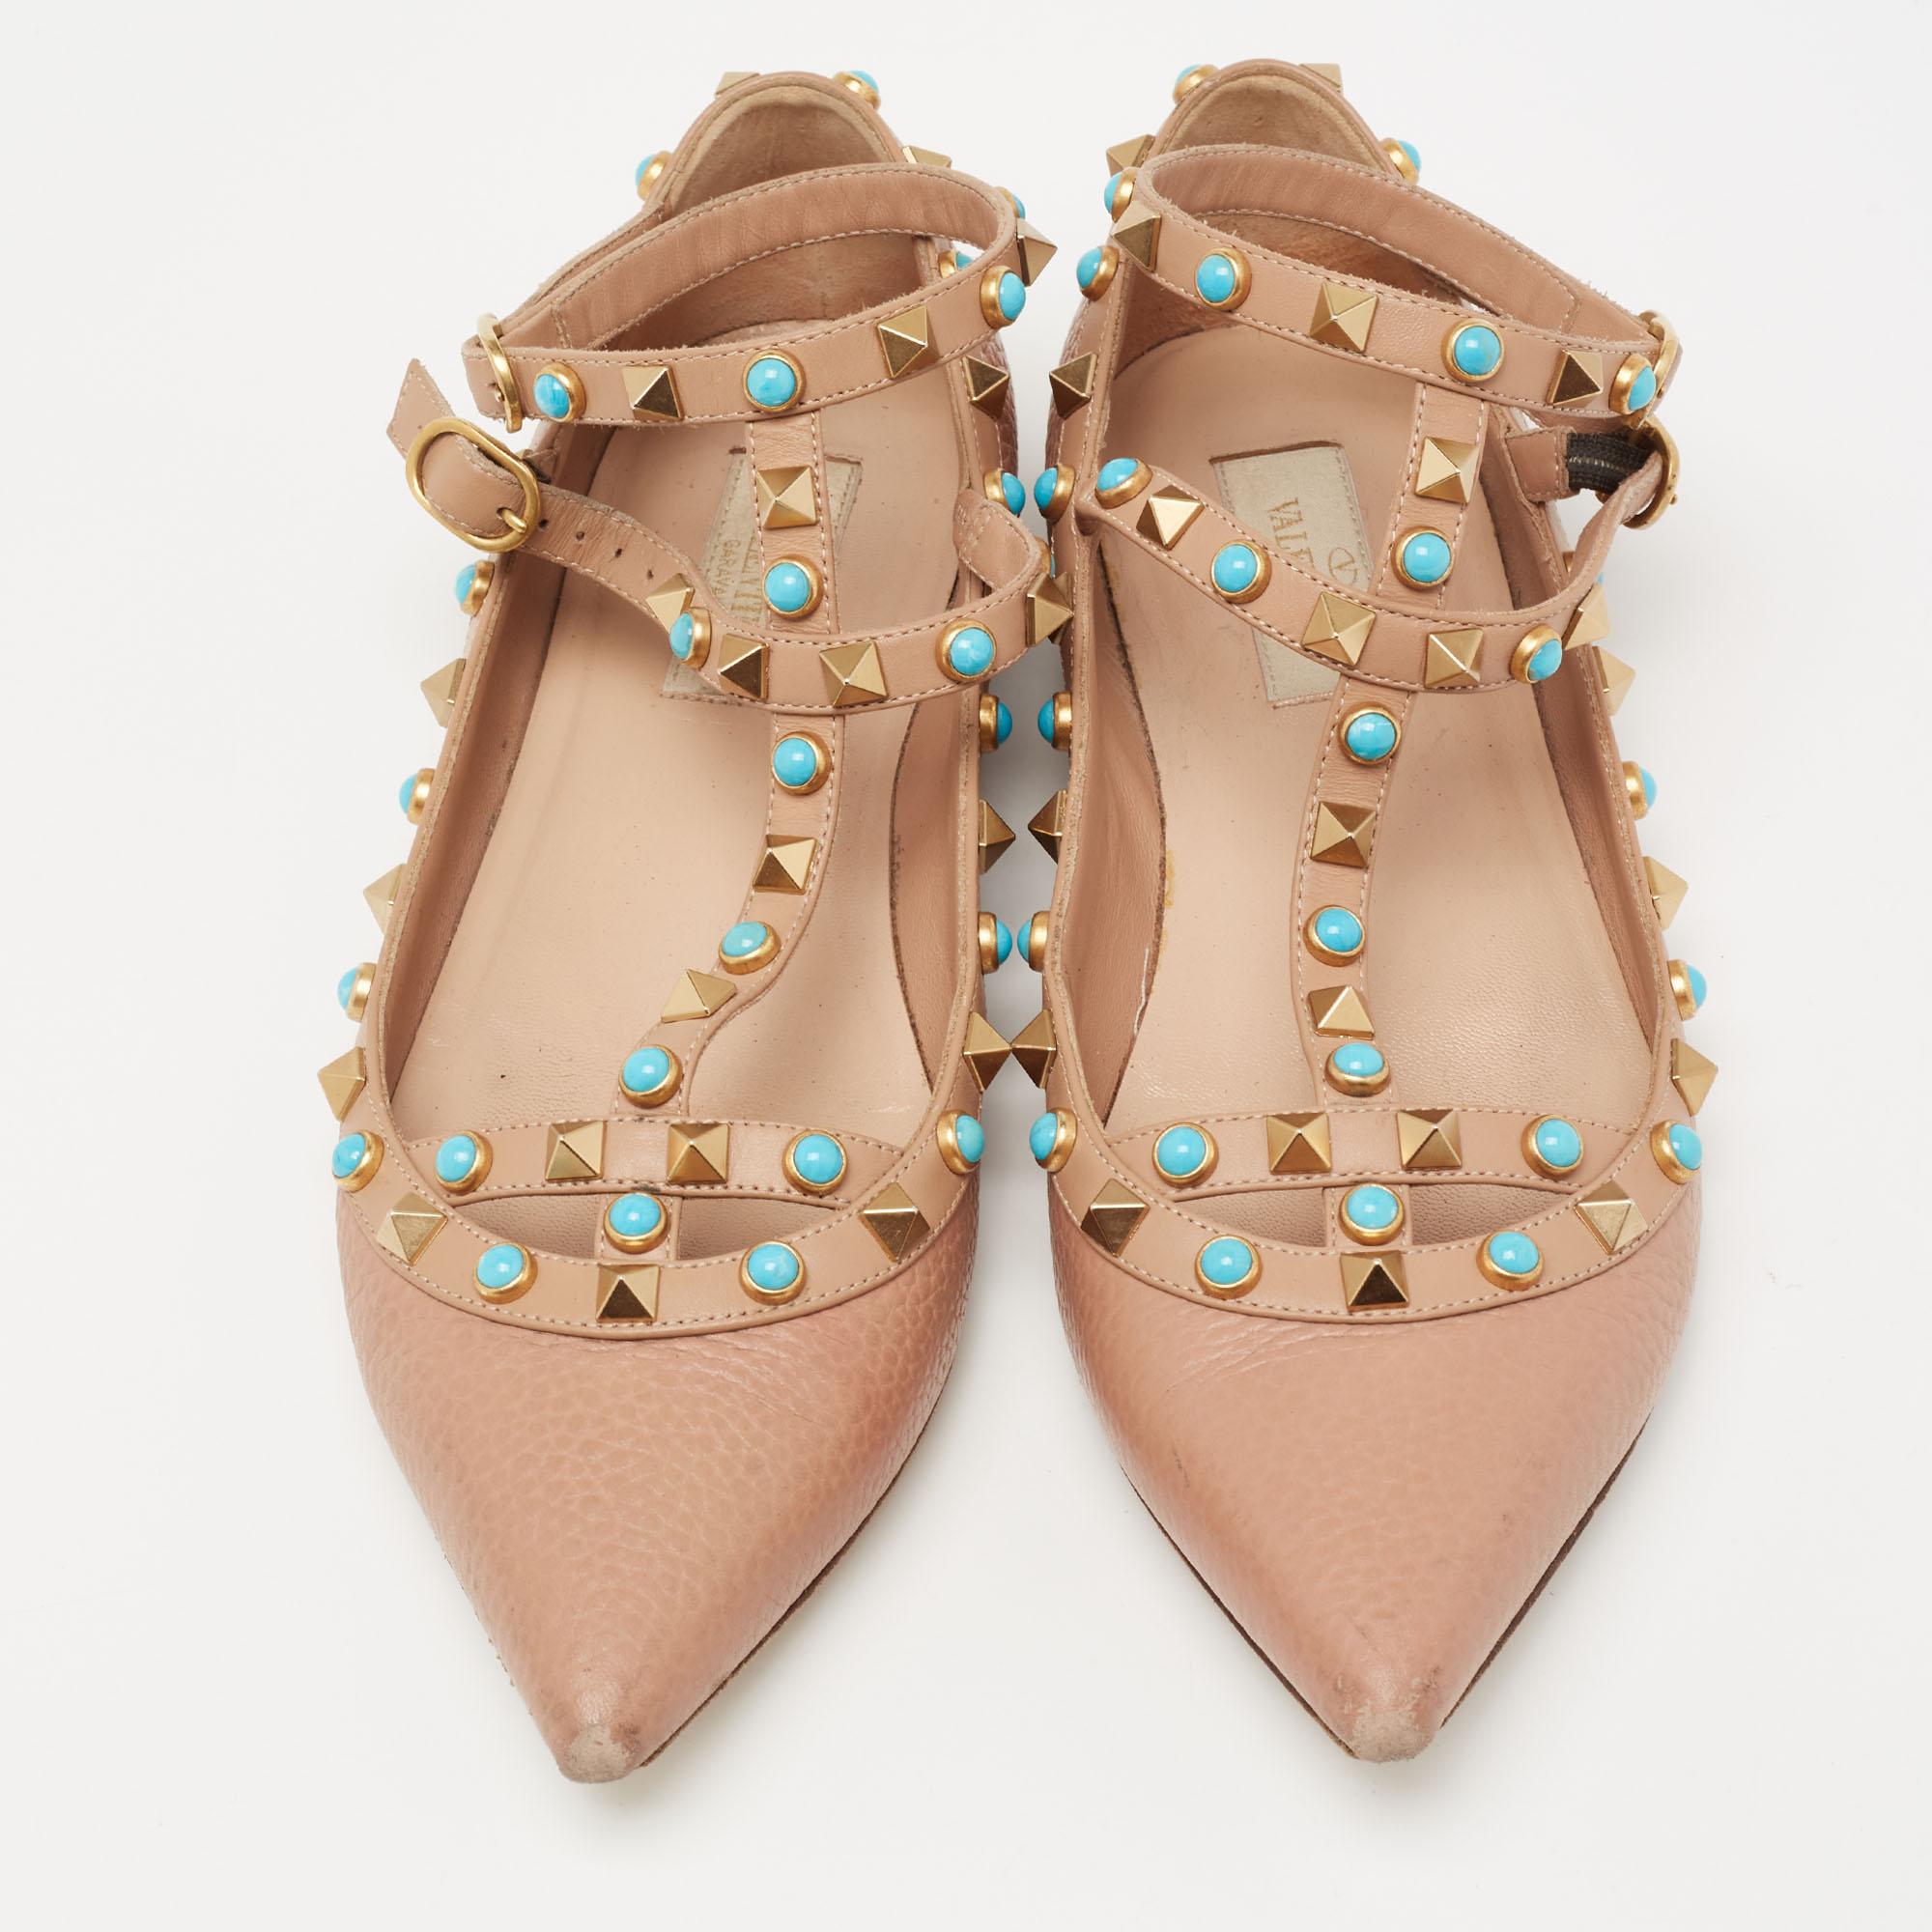 This Valentino design is not just widely popular but it is also the dream of every shoe lover. These flats are crafted from leather and they are soul-crushingly gorgeous! They come flaunting pointed toes, insoles made to assist you with beauty, and